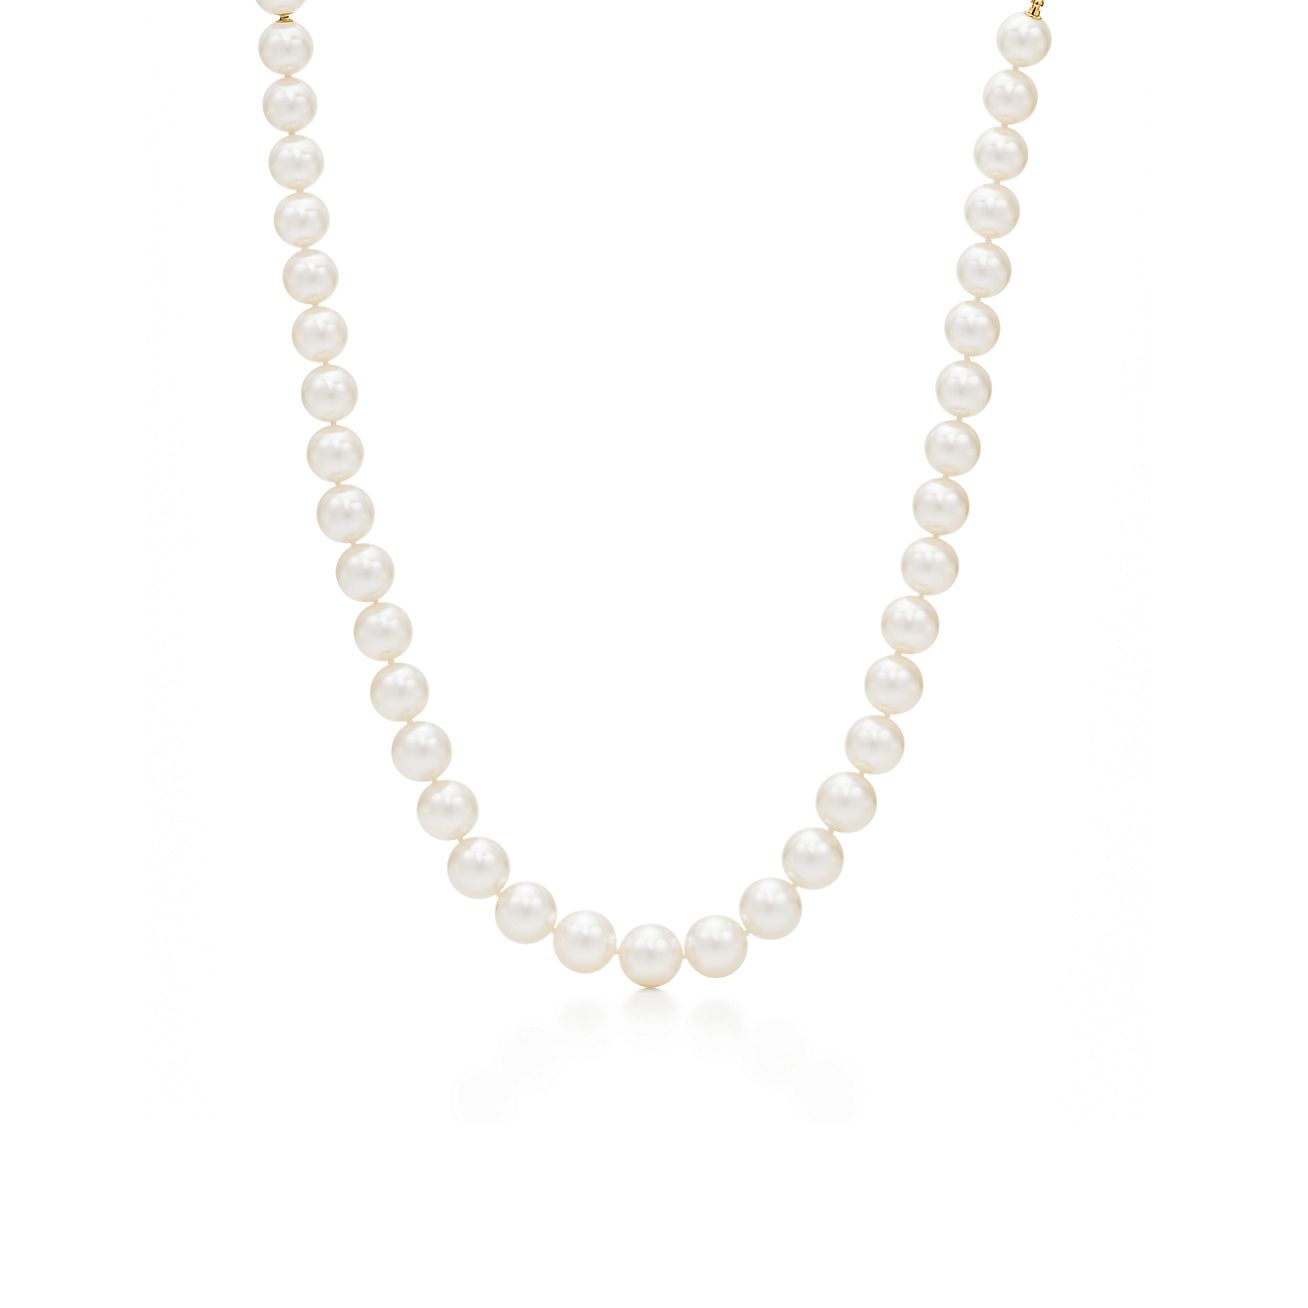 Tiffany South Sea necklace of cultured pearls with an 18k gold clasp ...